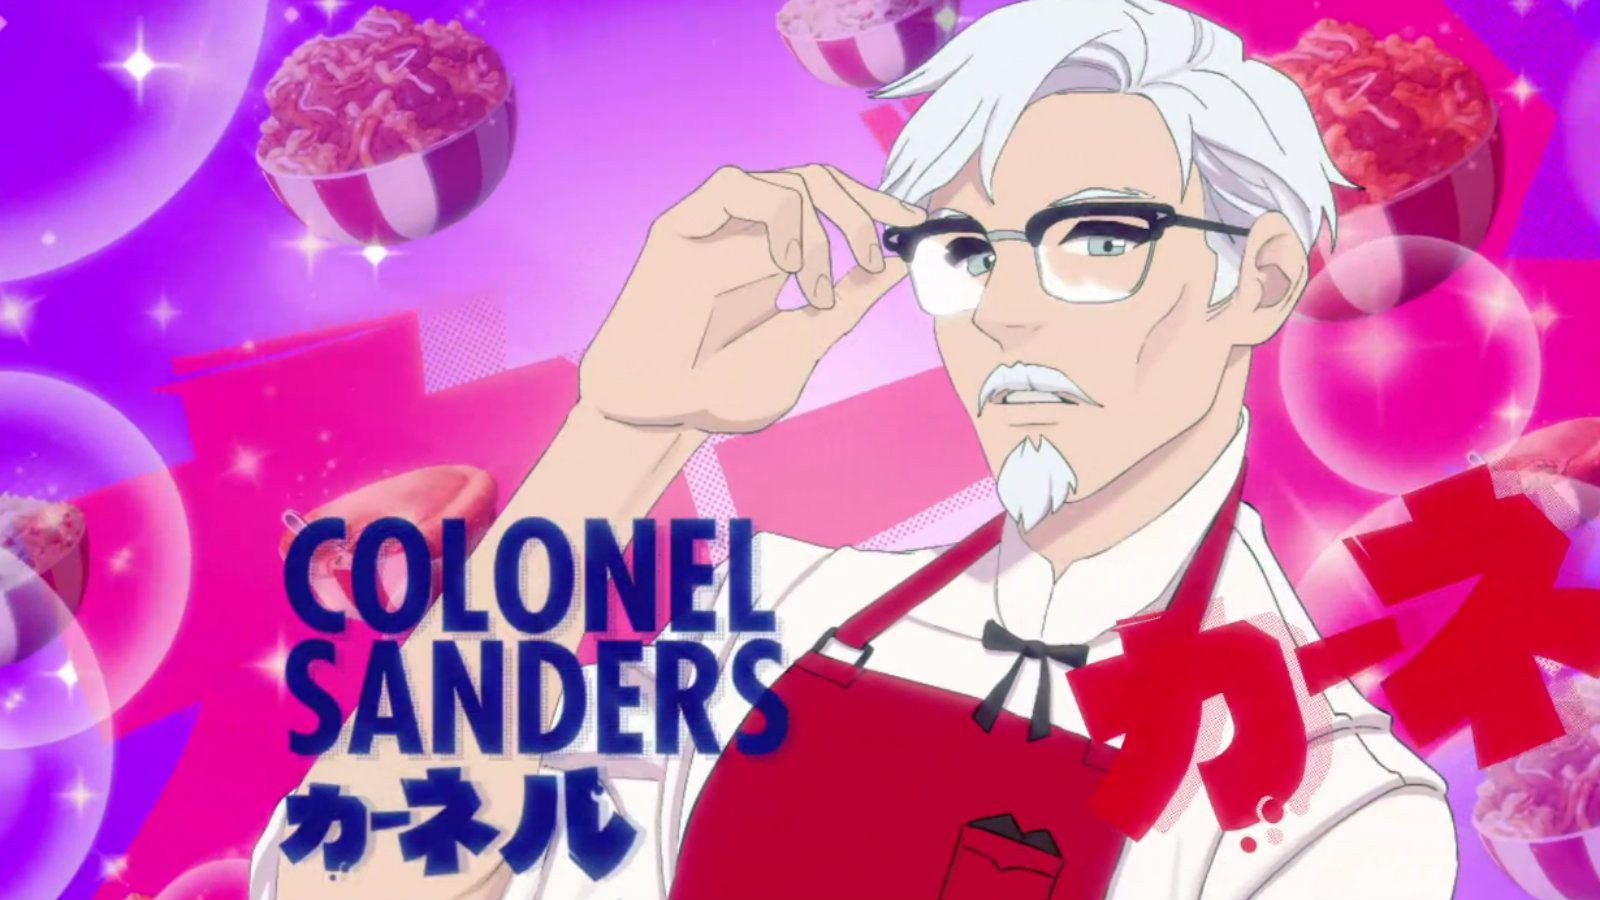 KFC's Anime Styled Dating Sim Lets You Date Colonel Sanders